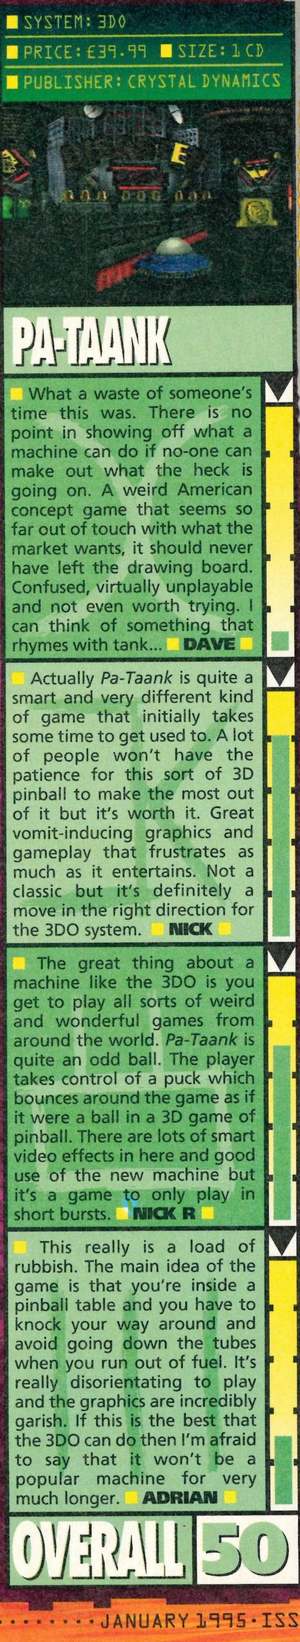 Thumbnail for File:Pataank Review Games World UK Issue 7.png